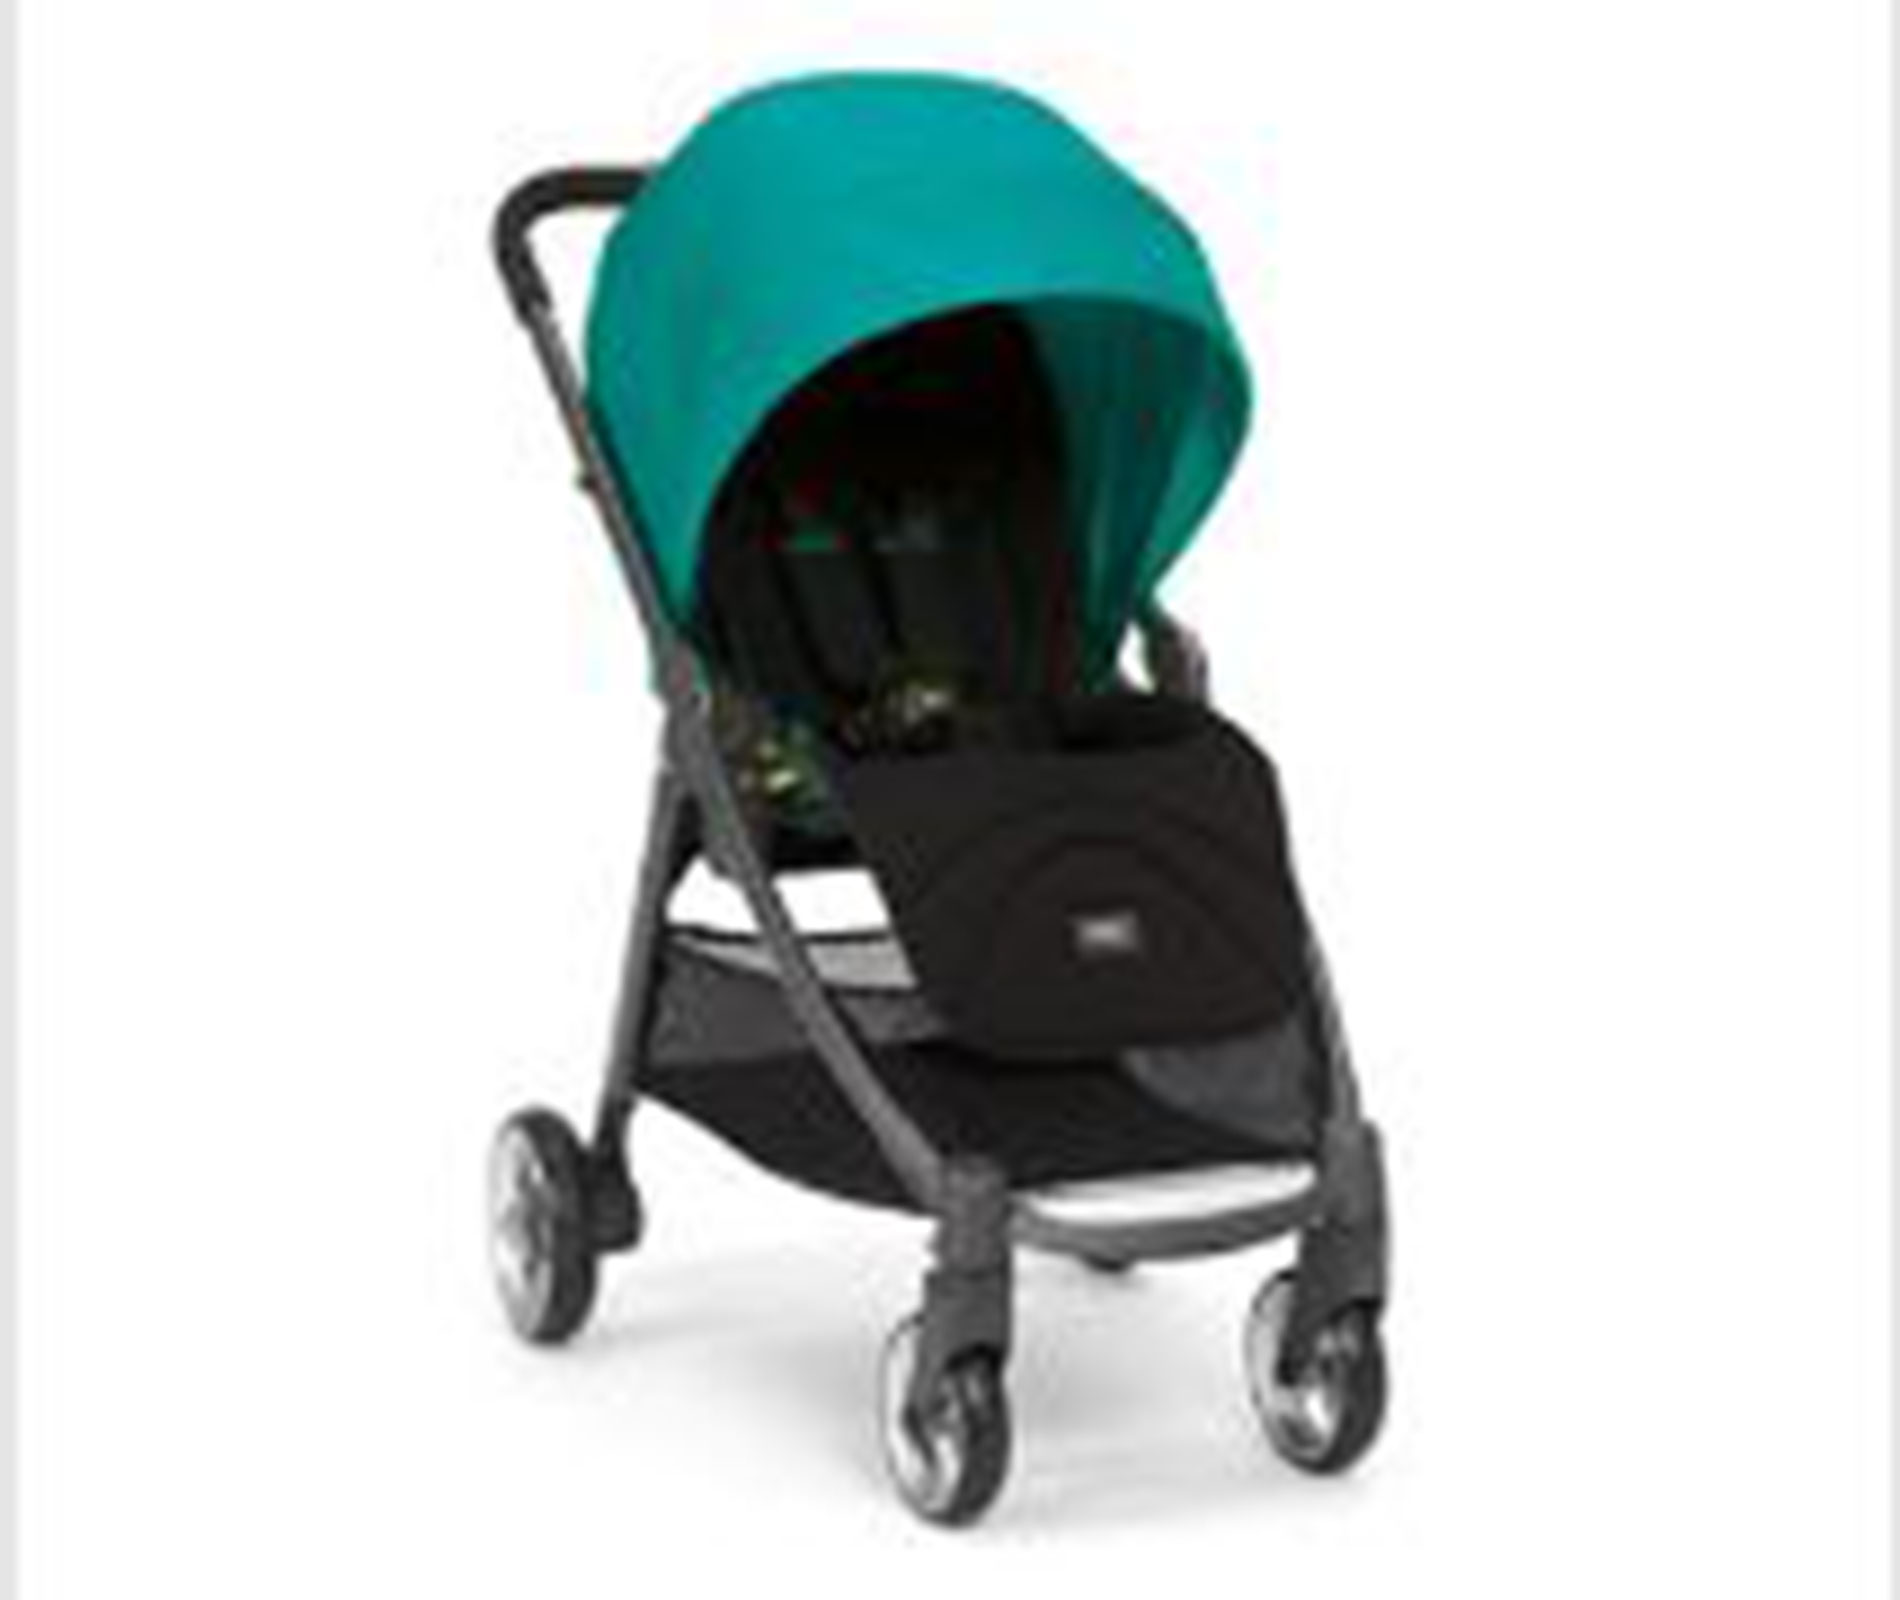 Product recall for faulty prams